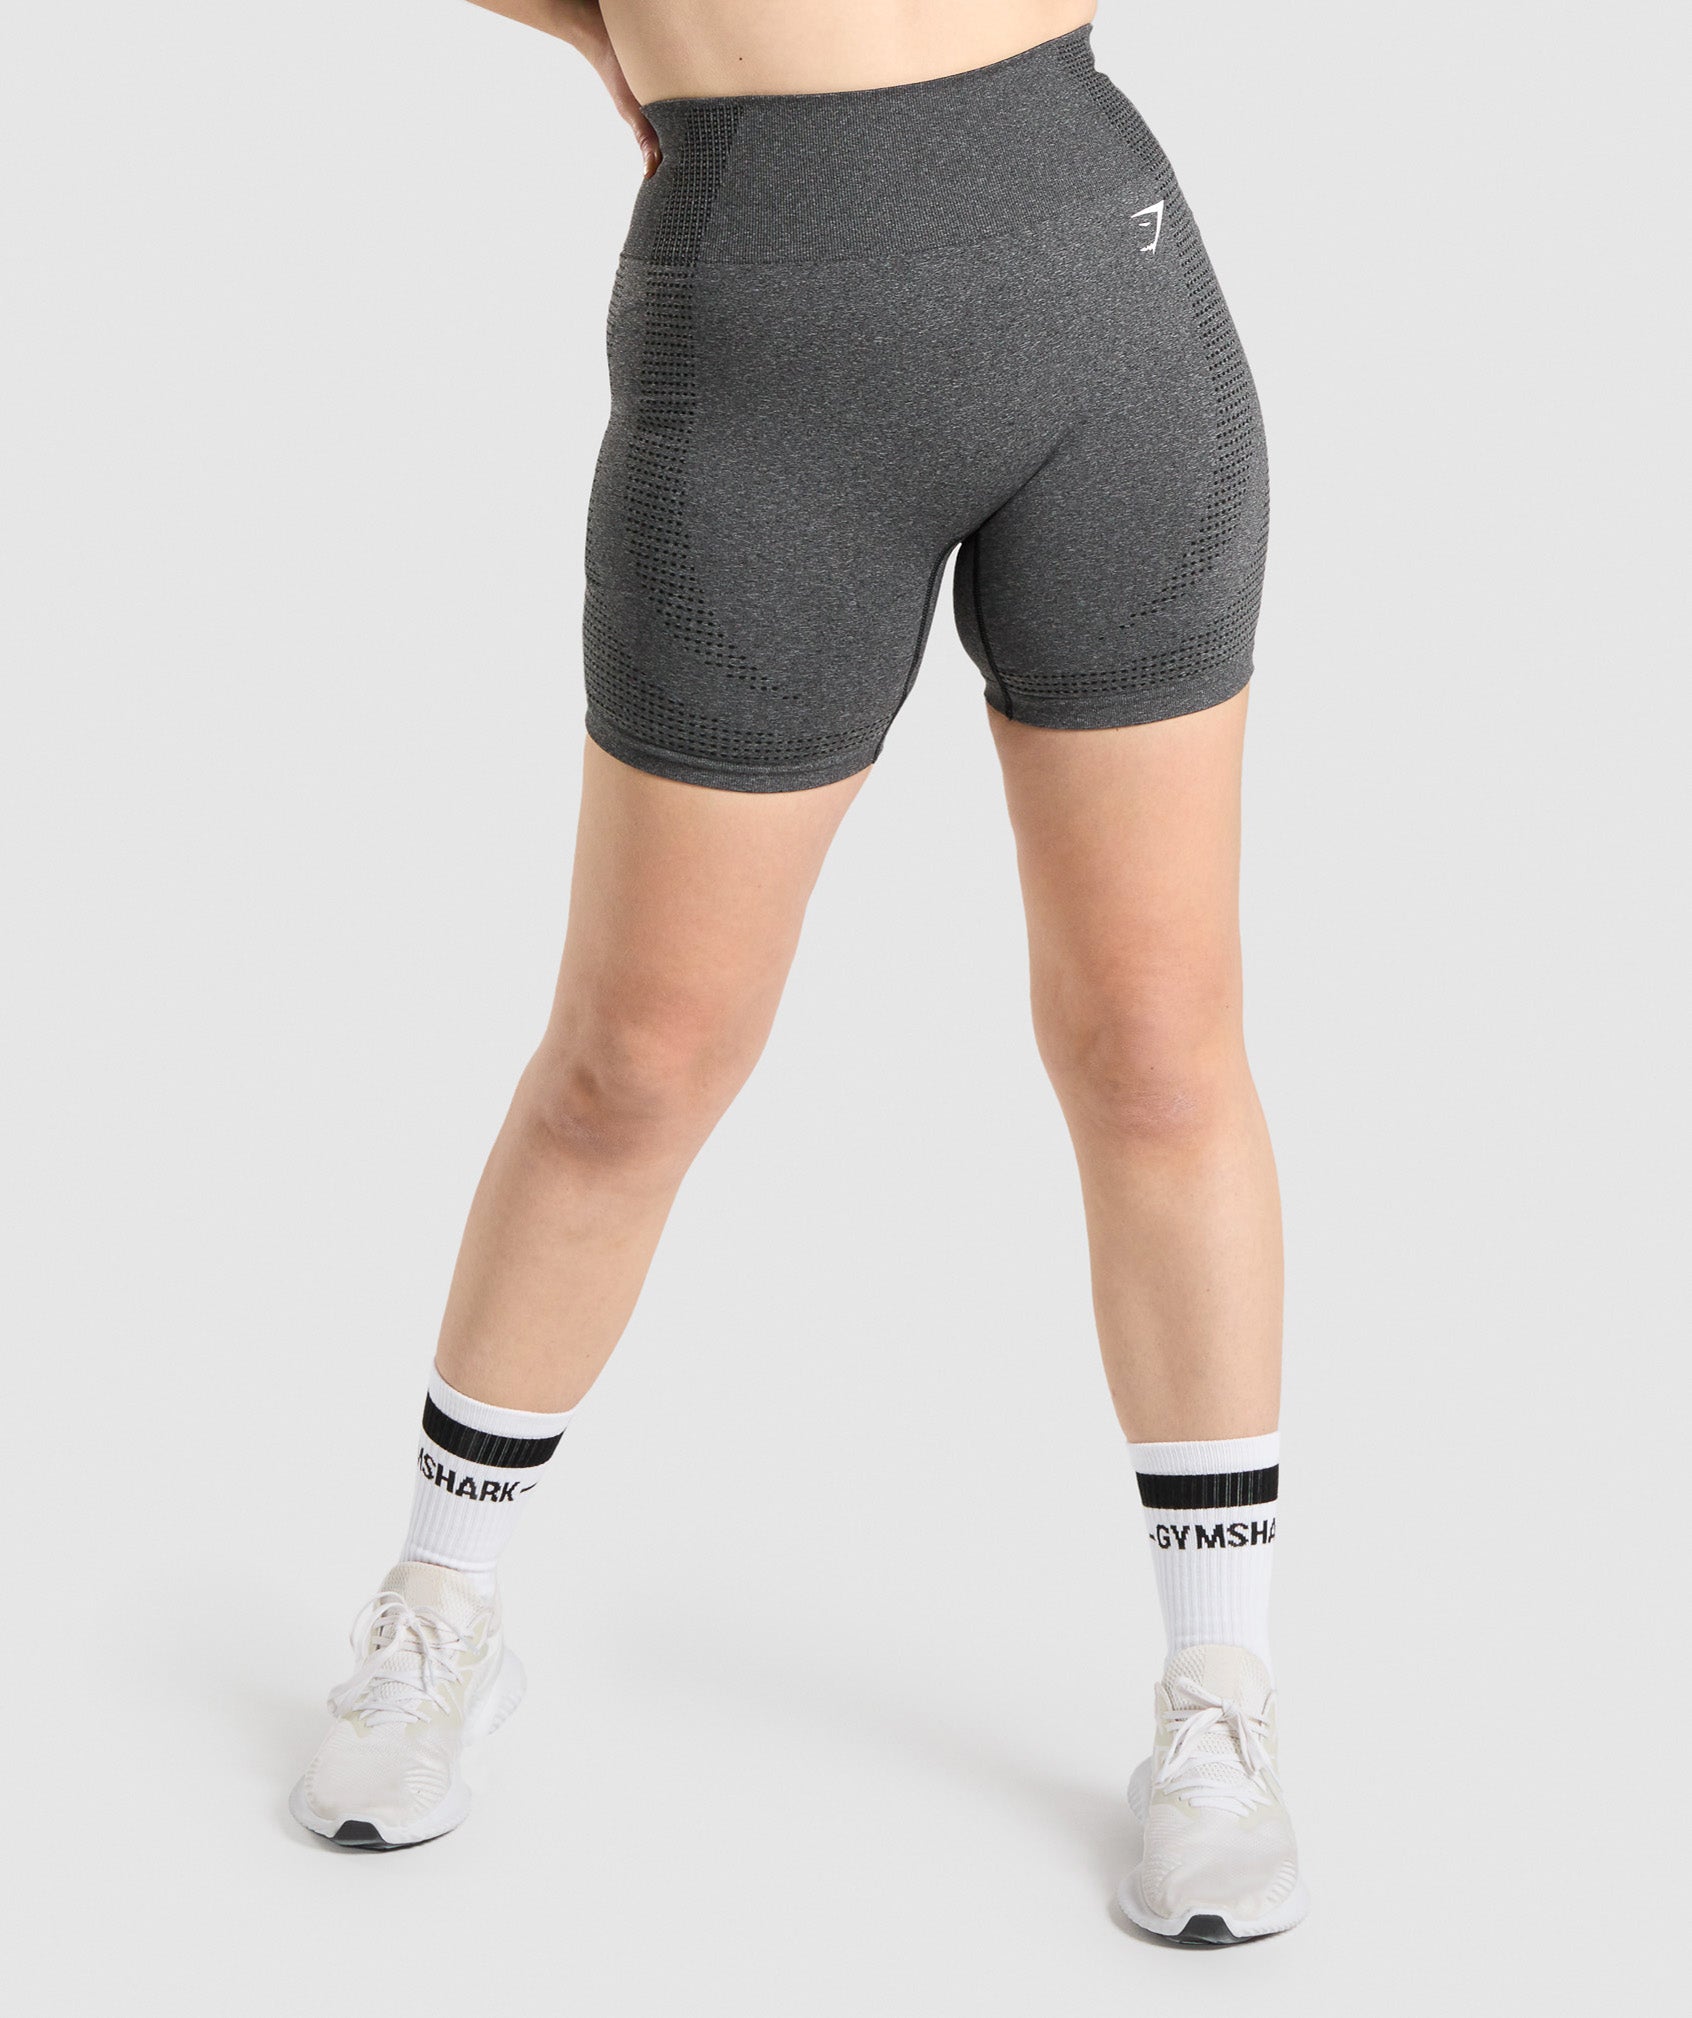 Vital Seamless 2.0 Shorts in Charcoal Marl - view 1